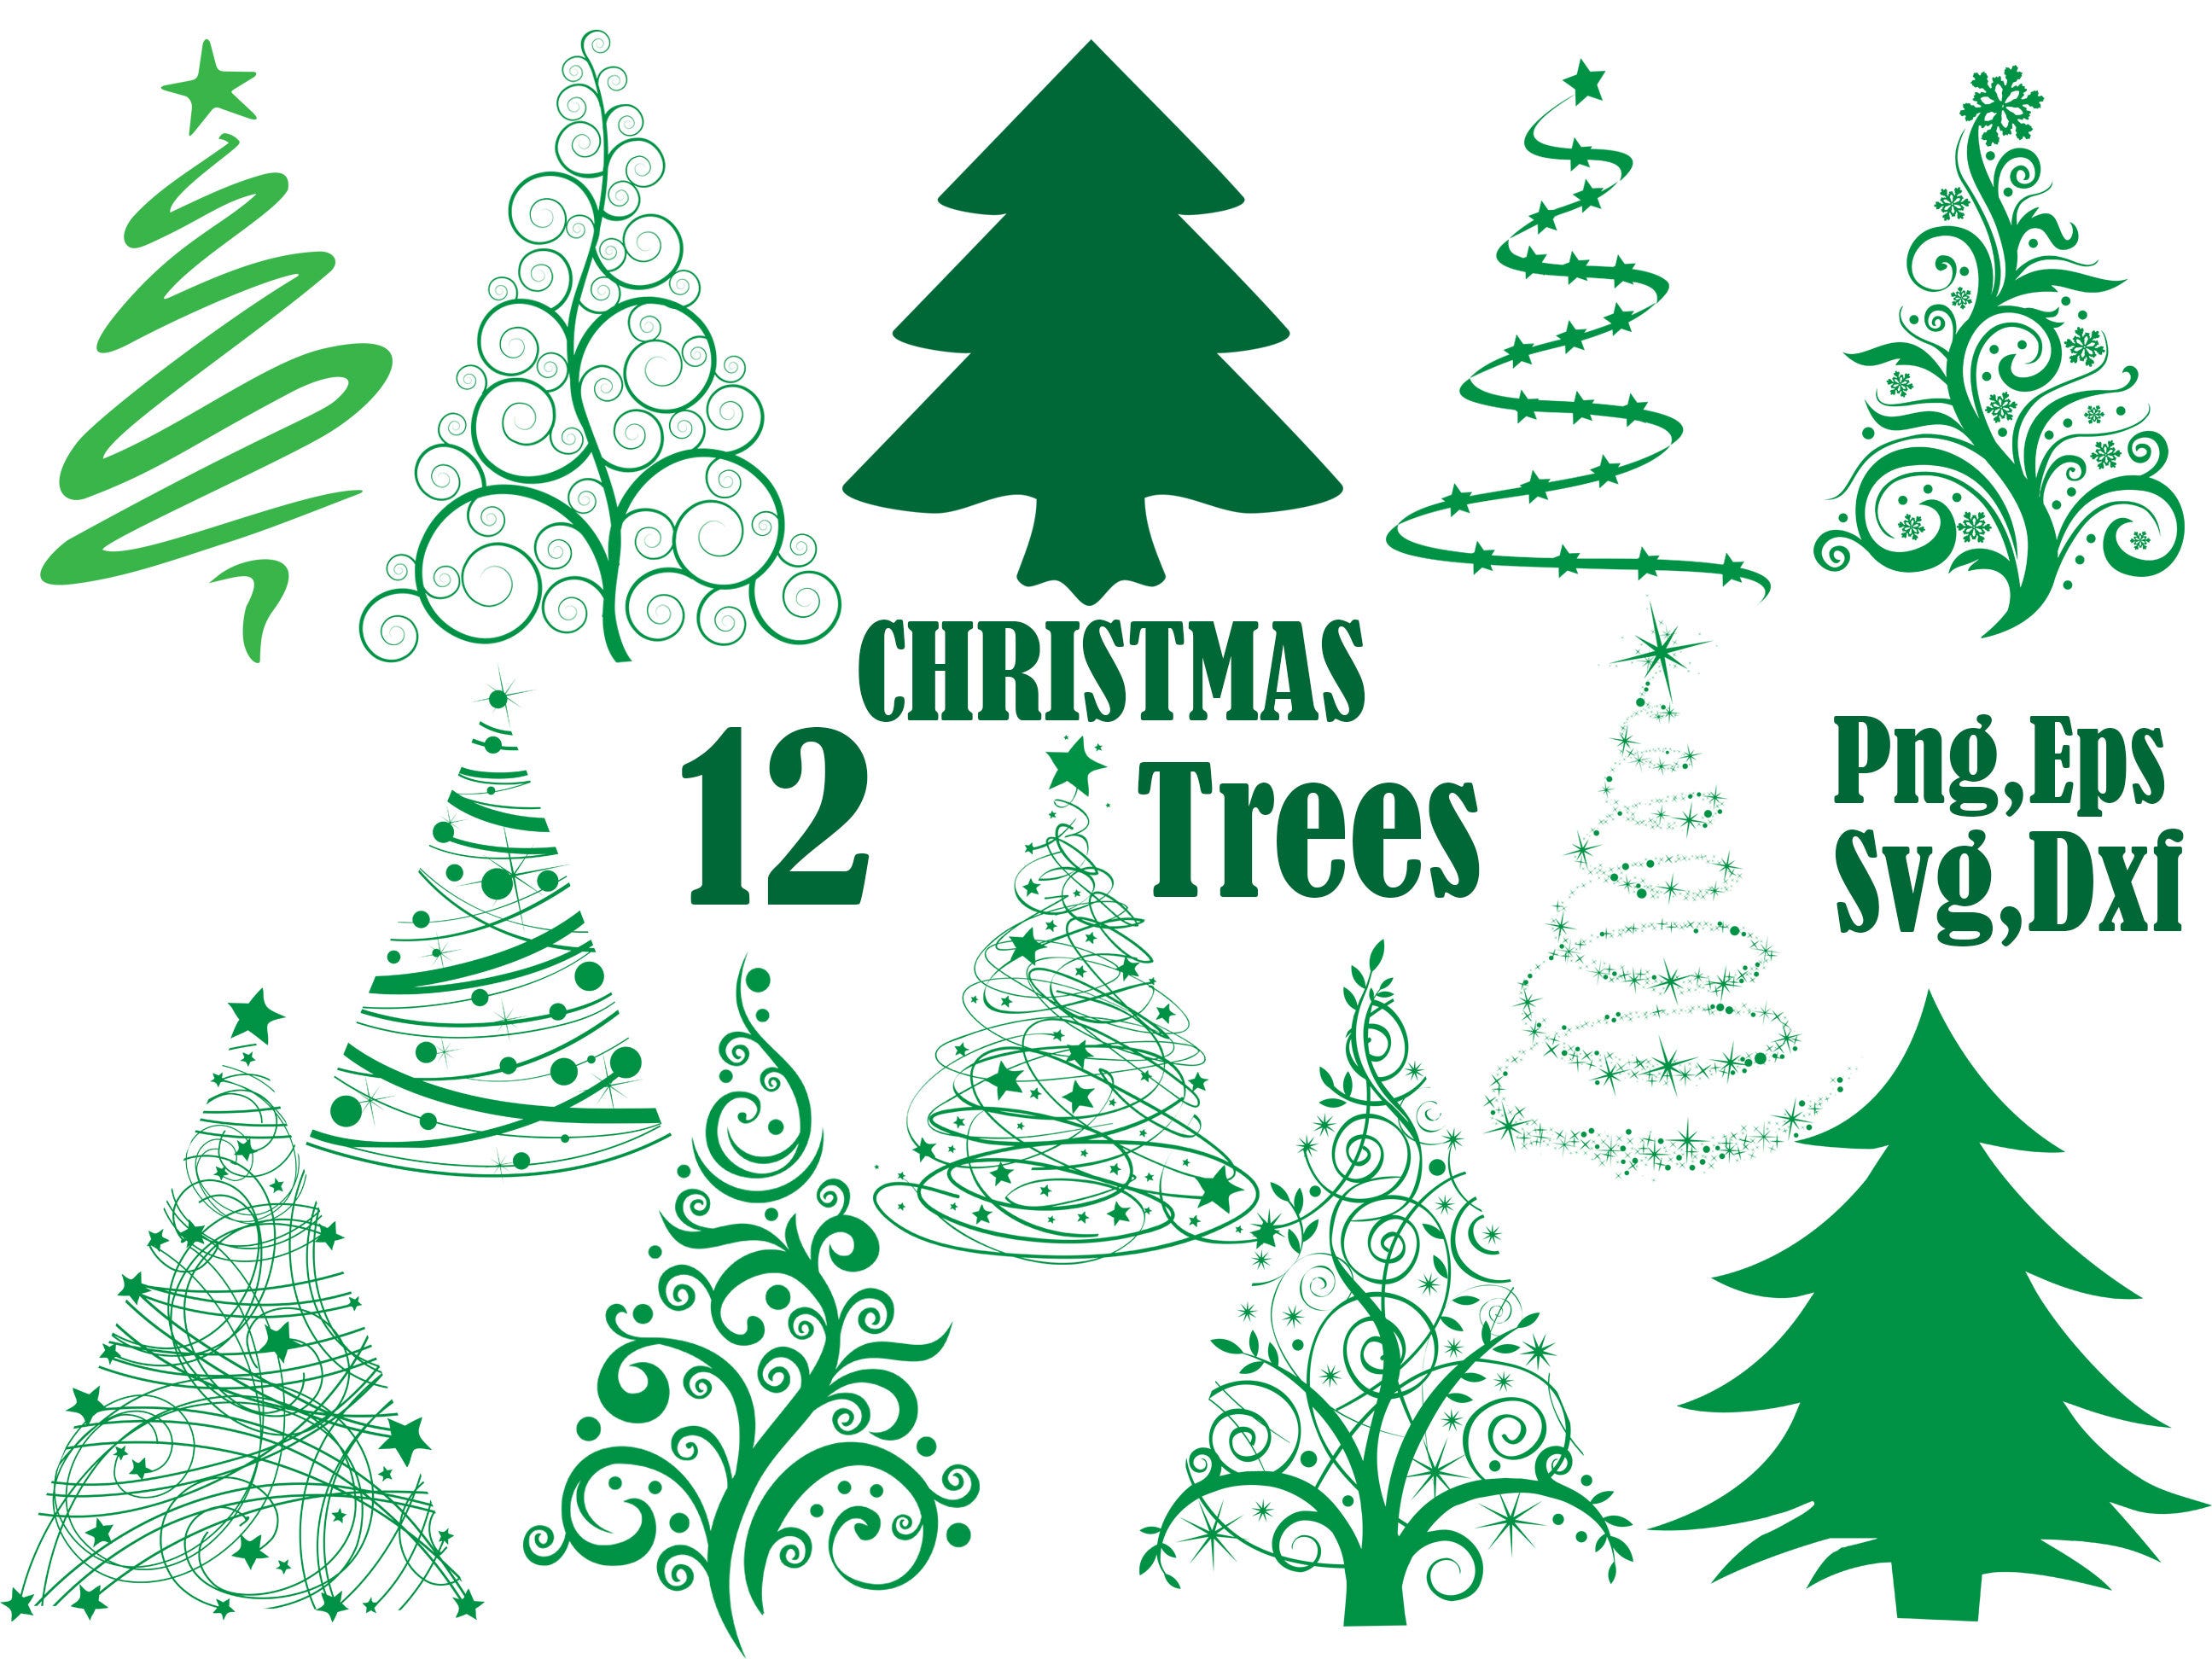 Christmas Tree Svg Silhouette clipart: "PINE TREES CLIPART"  Christmas Svg Vector Clipart Xmas Tree Hollyday Clipart Tree scrapbooking dxf